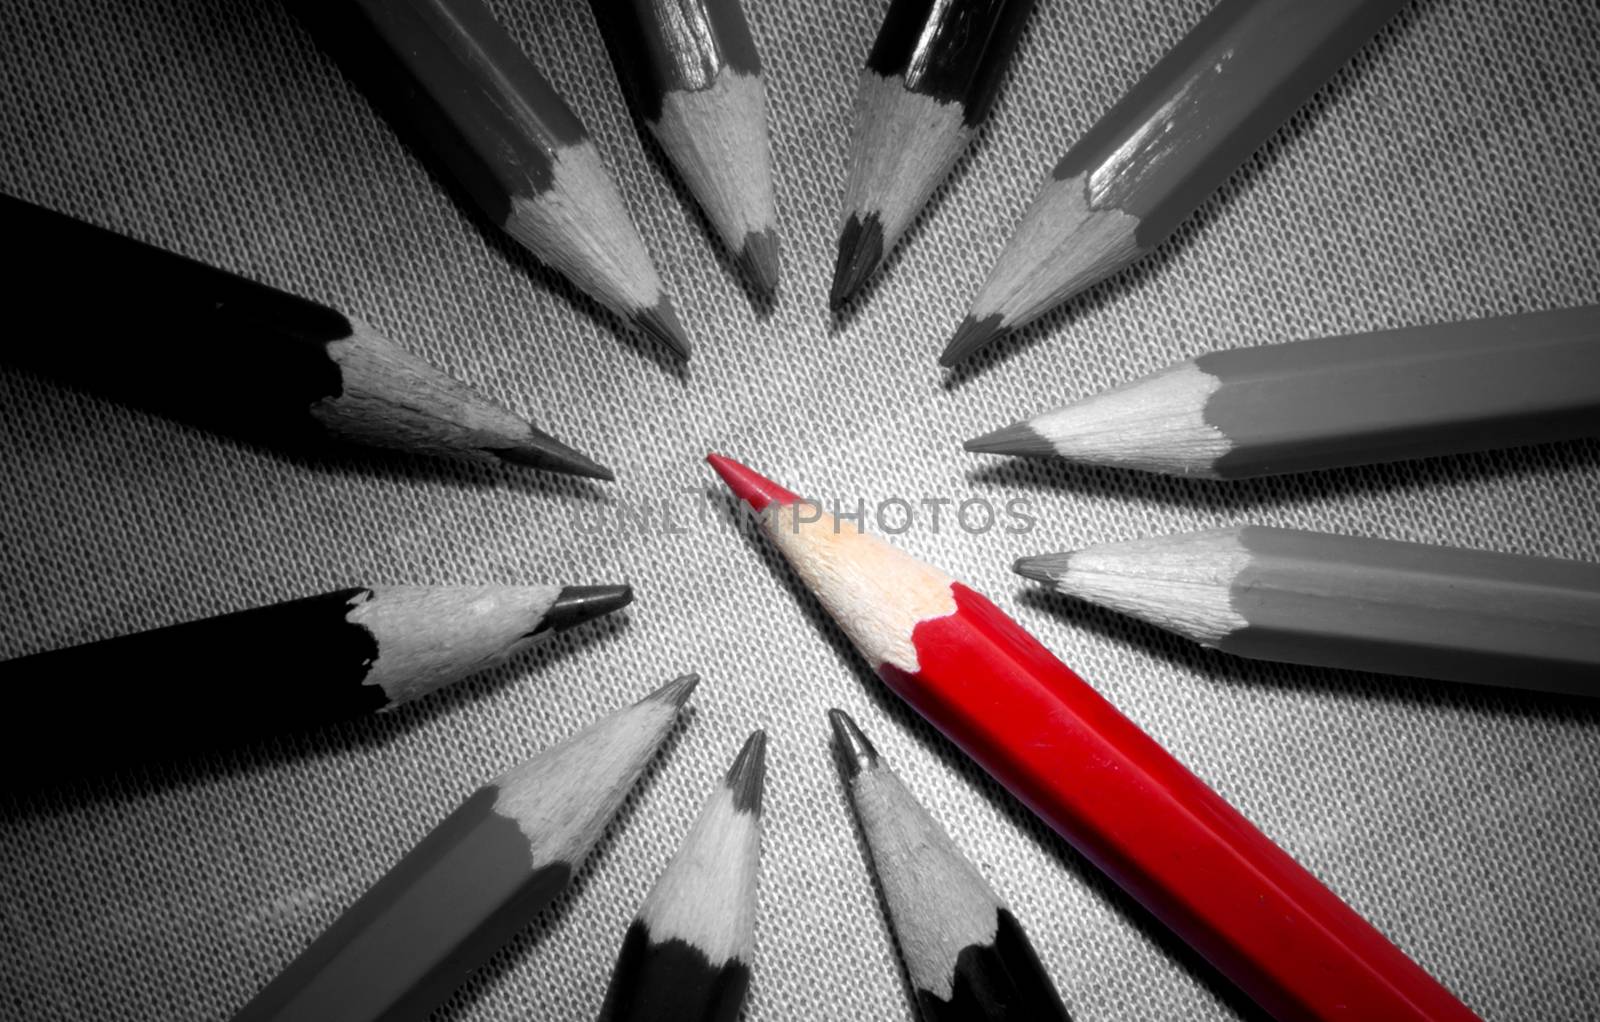 Red pencil standing out in a group of black and white pencils